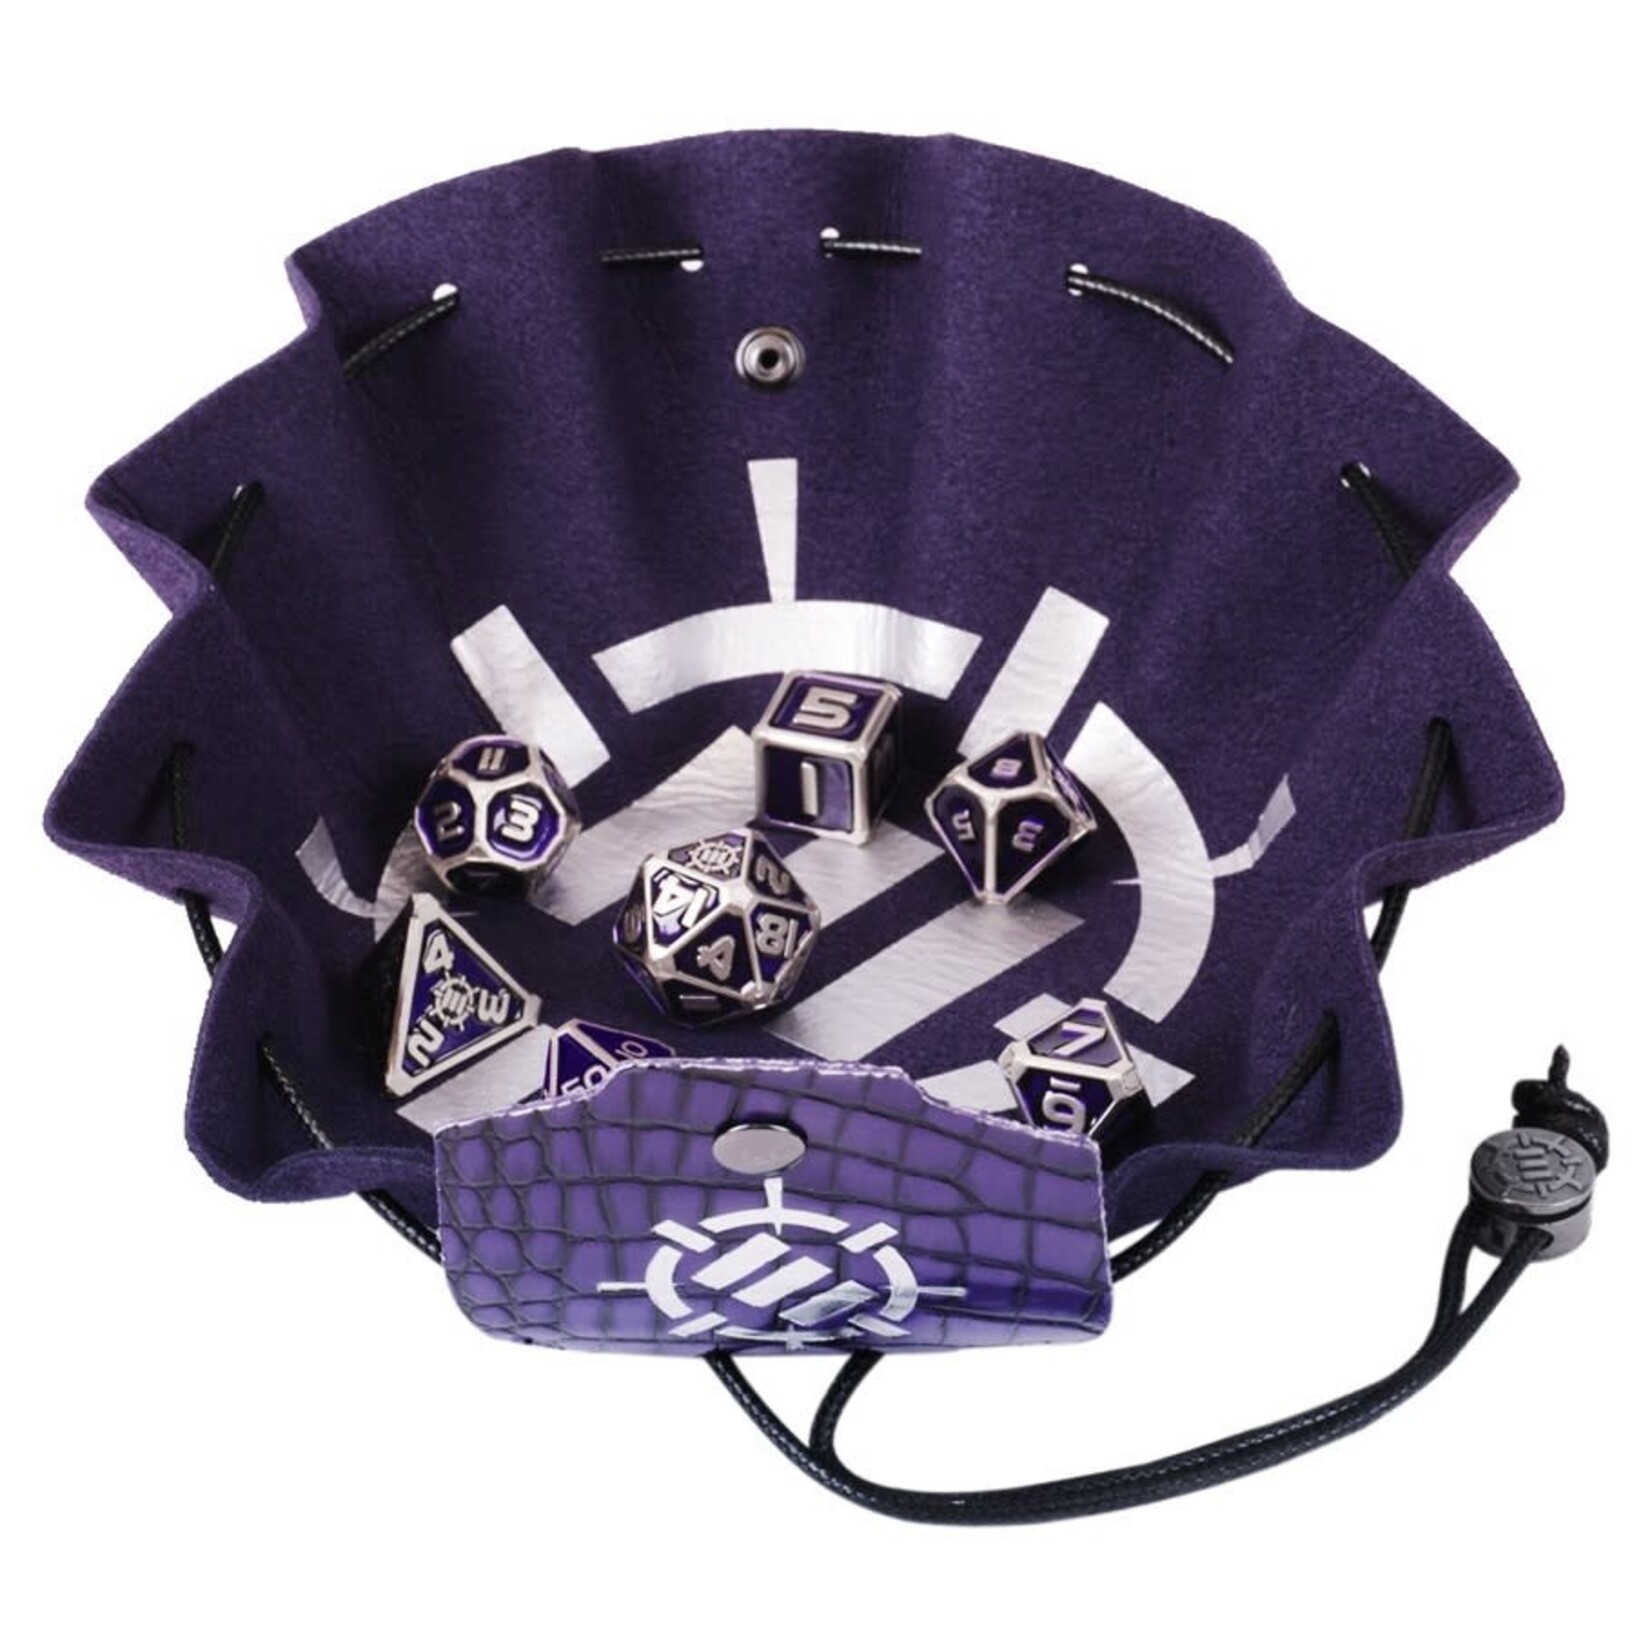 Enhance Gaming 7-Set Enhance: Purple Enamel Dice with Dice Pouch/Tray